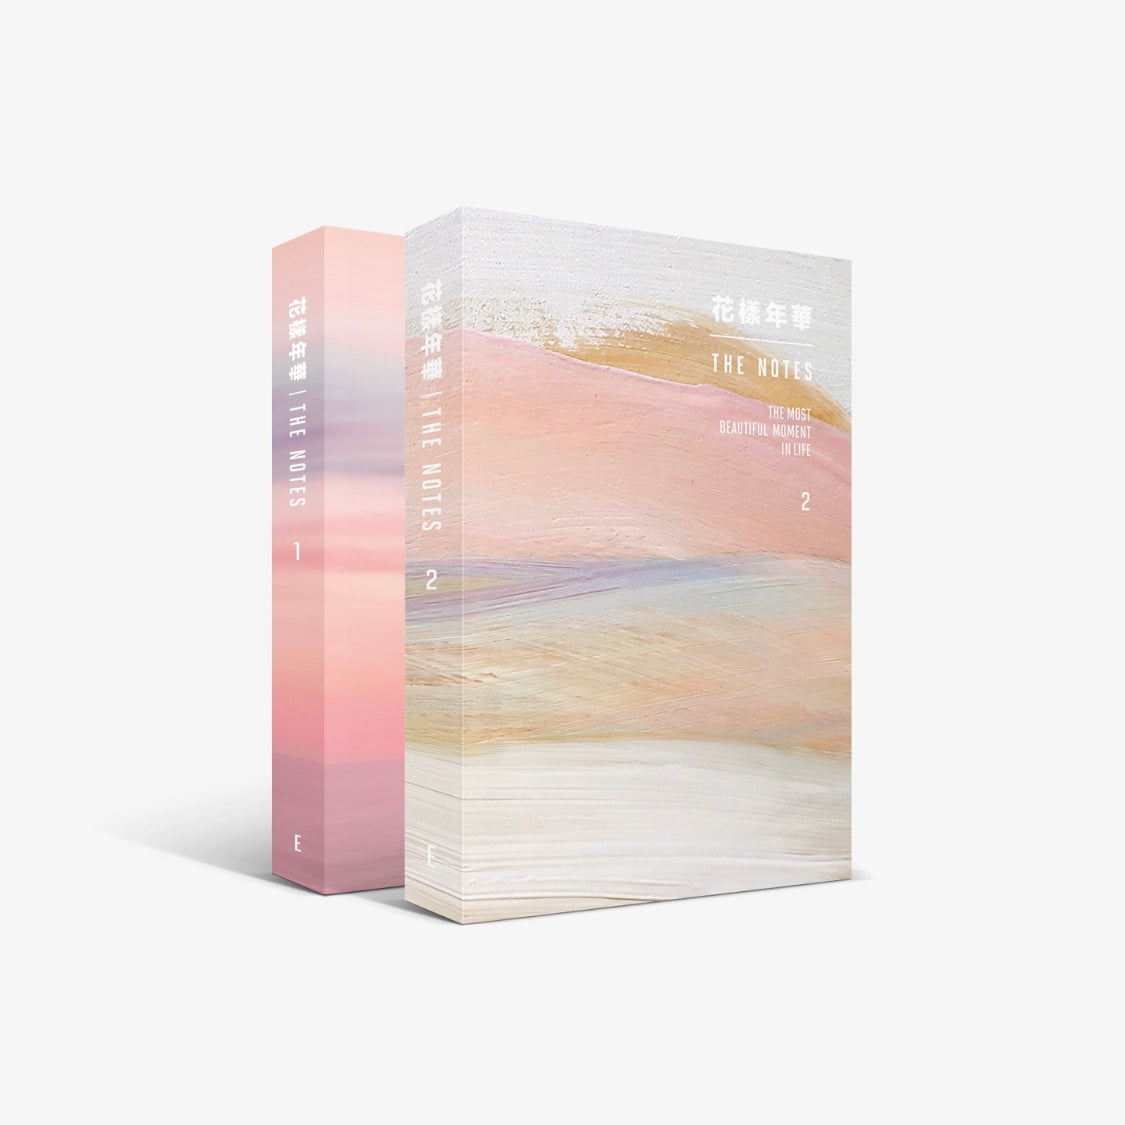 BTS 花様年華 THE NOTES 1 2 PACKAGE-